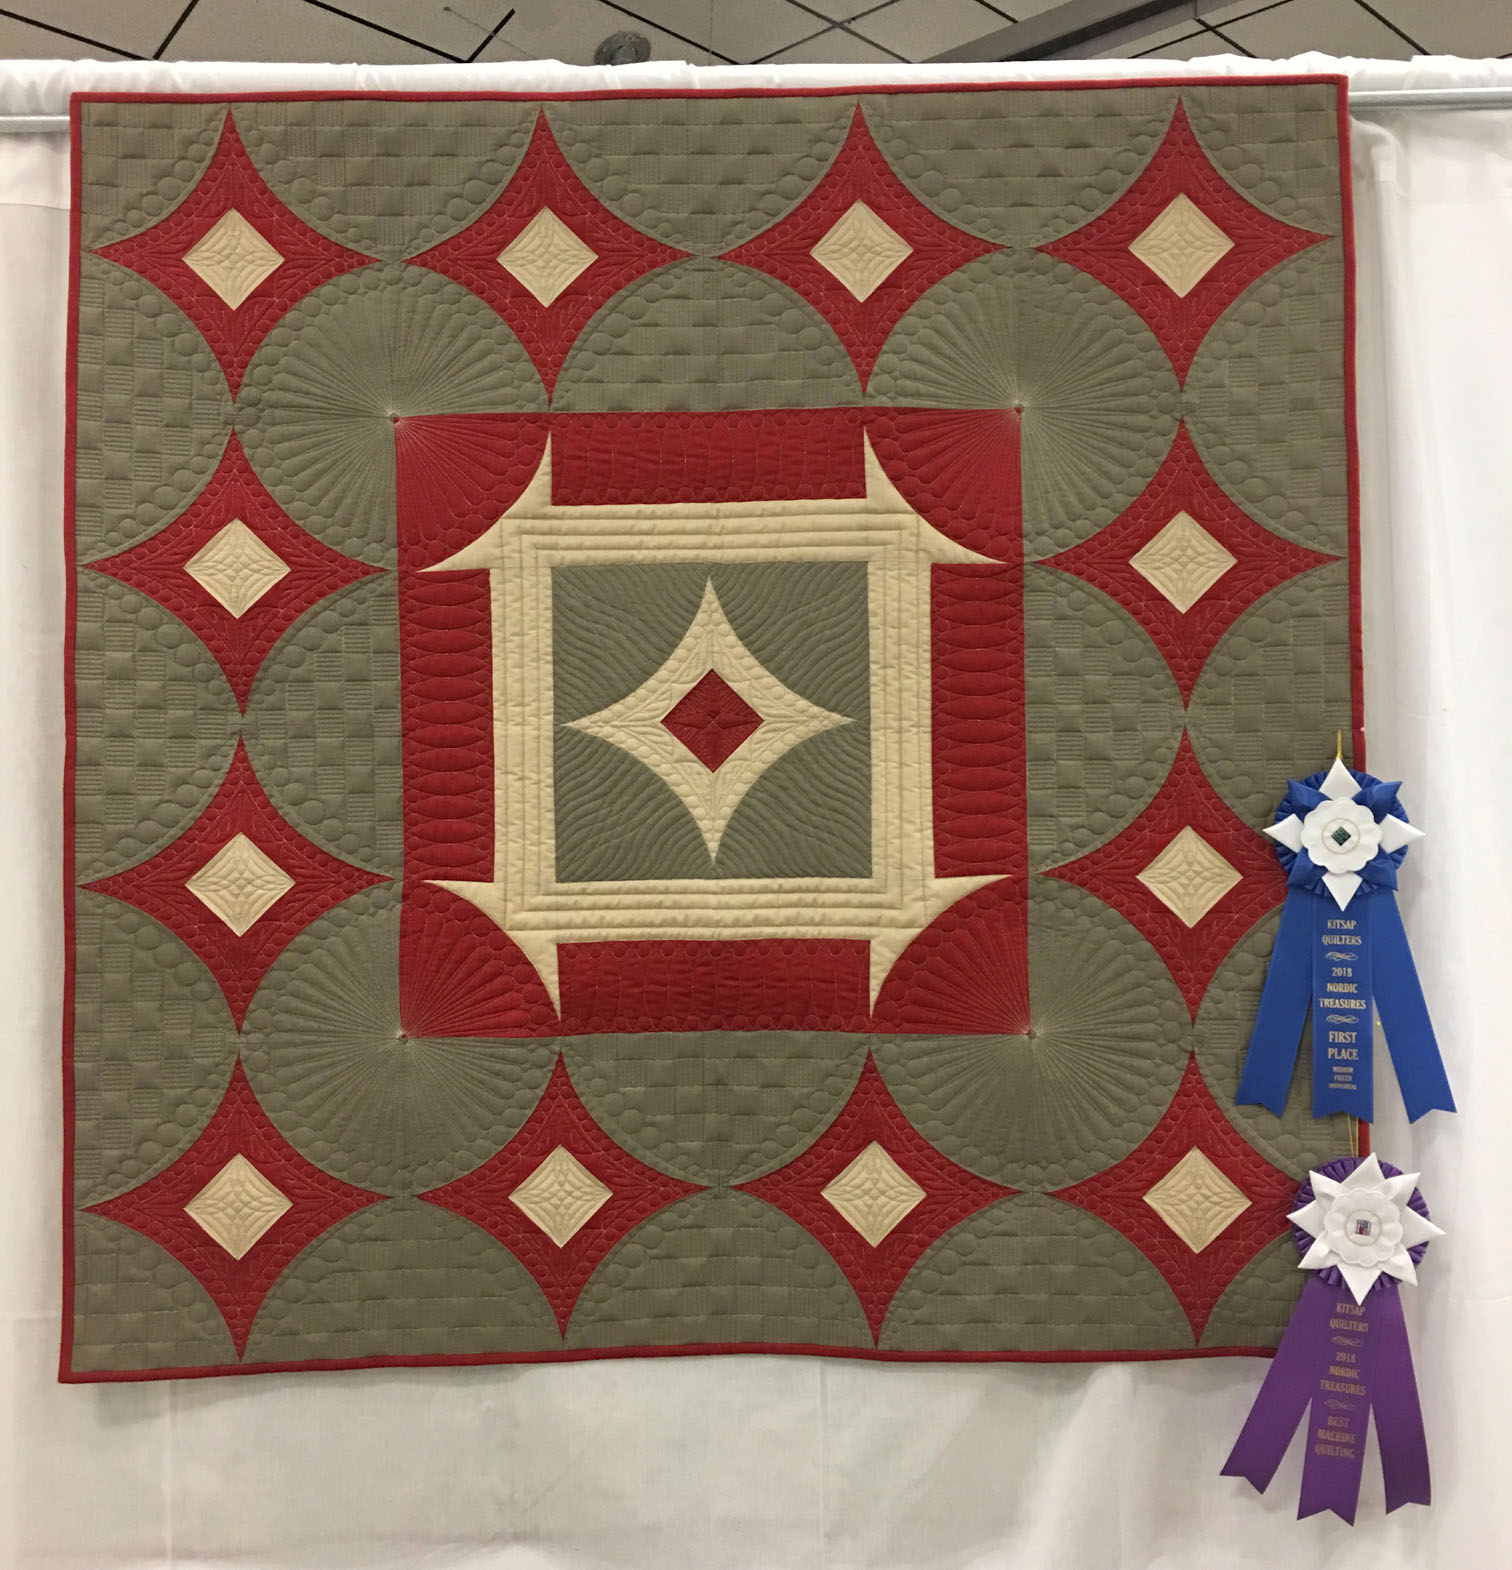 515A “French General the Modern Way” by Pam Knight, 1st place Med. Individual Quilt and Best Machine Quilting, 2018 Kitsap Quilt Show